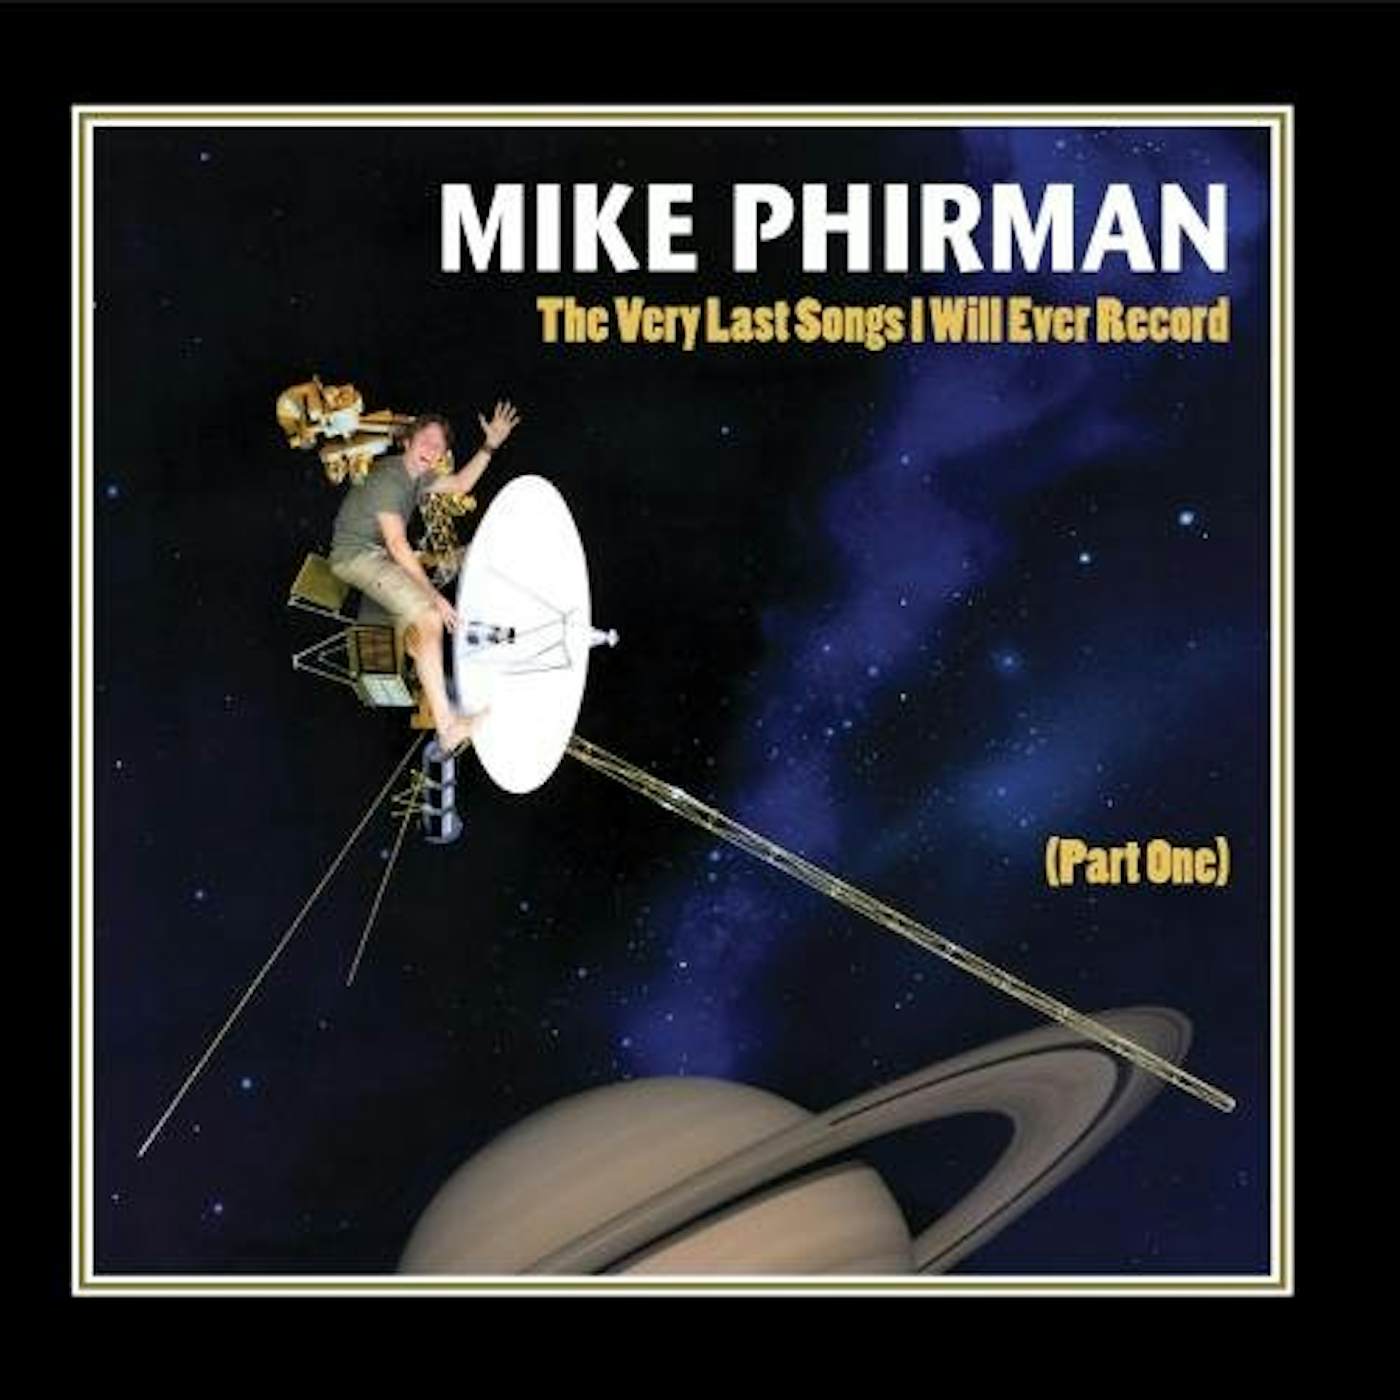 Mike Phirman VERY LAST SONGS I WILL EVER RECORD 1 CD